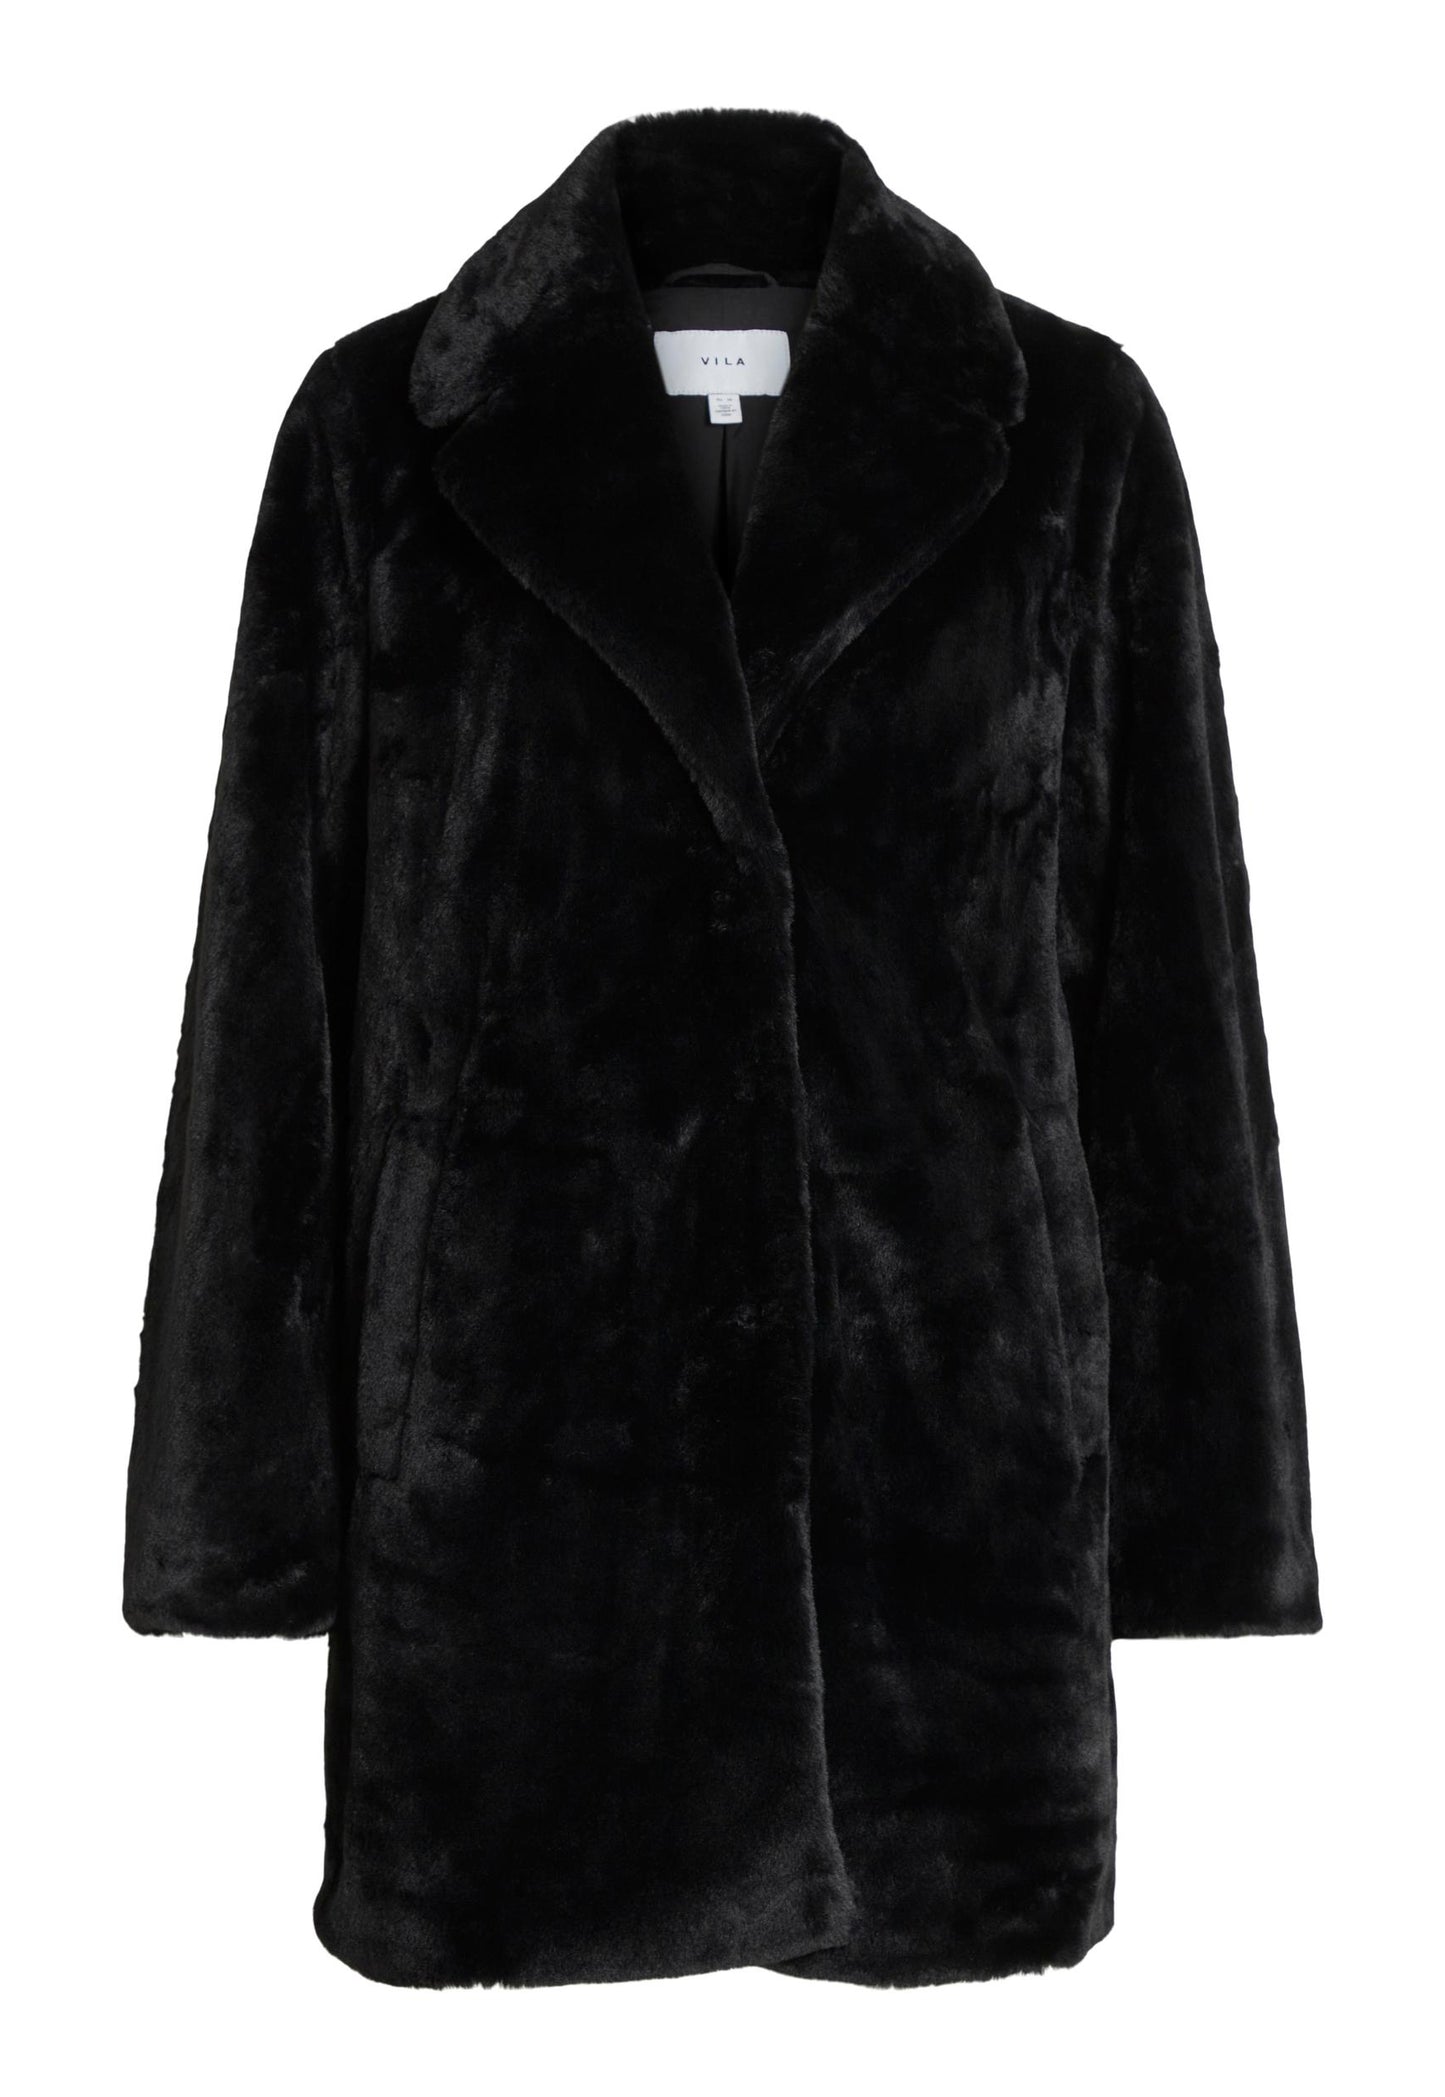 
                  
                    VILA New Ebba Vintage Style Faux Fur Midi Coat with Collar in Black - One Nation Clothing
                  
                